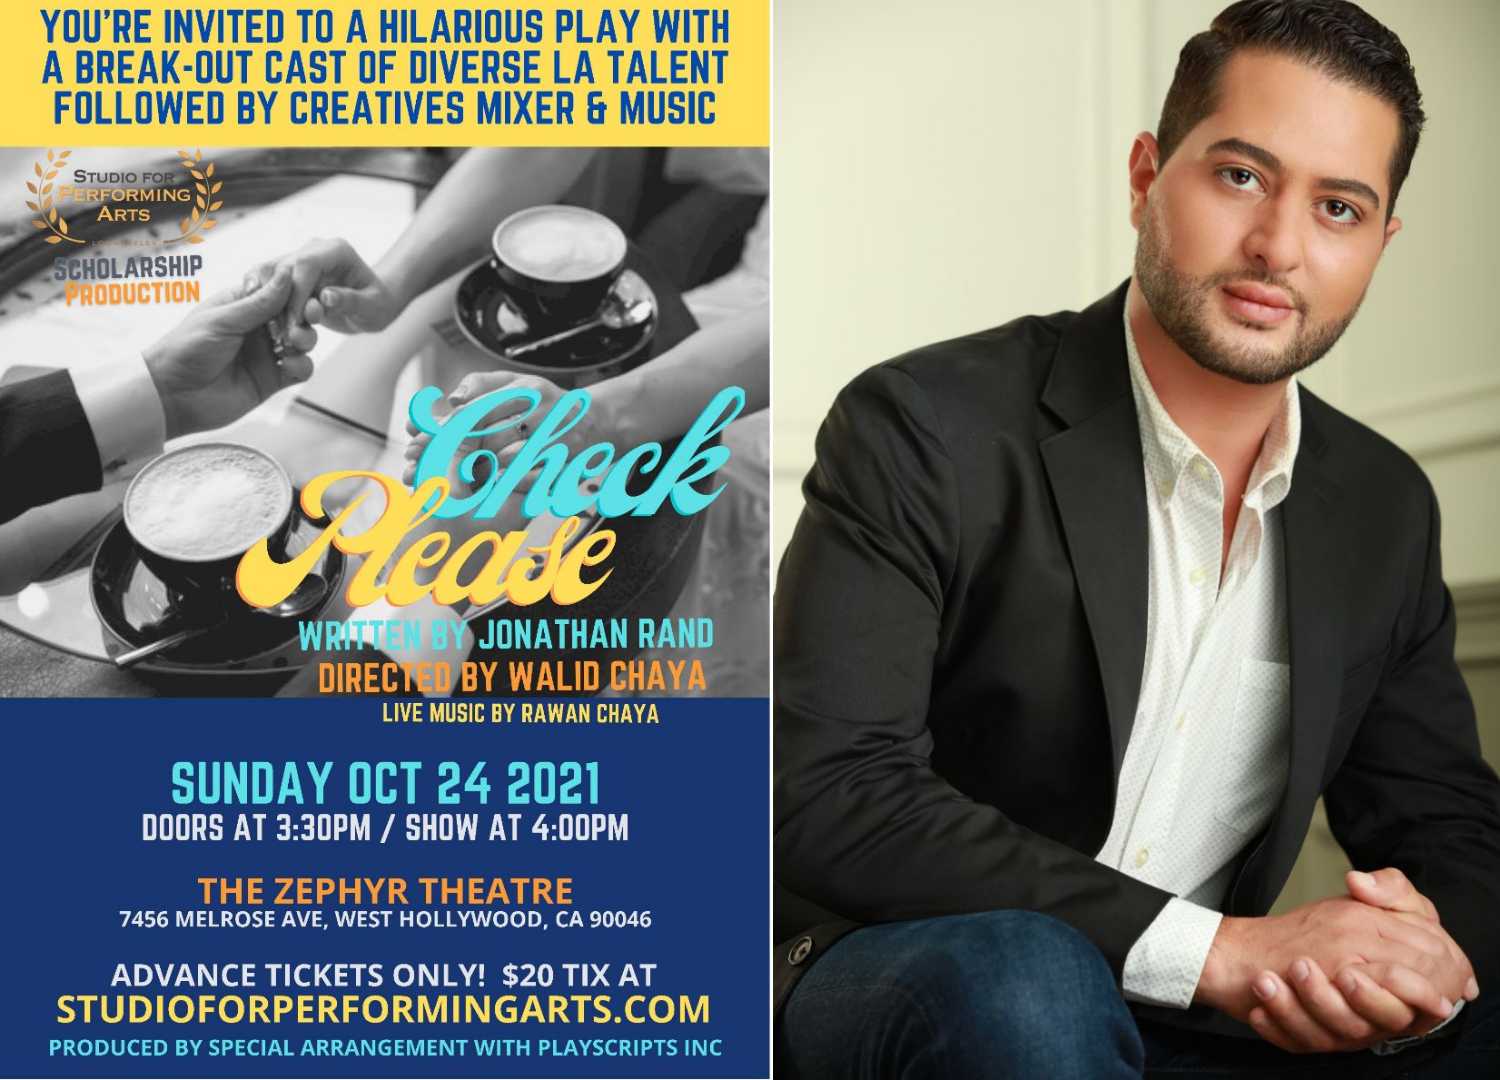 Hollywood News: Walid Chaya Directs ‘Check Please’ A Hilarious Comedy Followed By A Creatives Mixer!